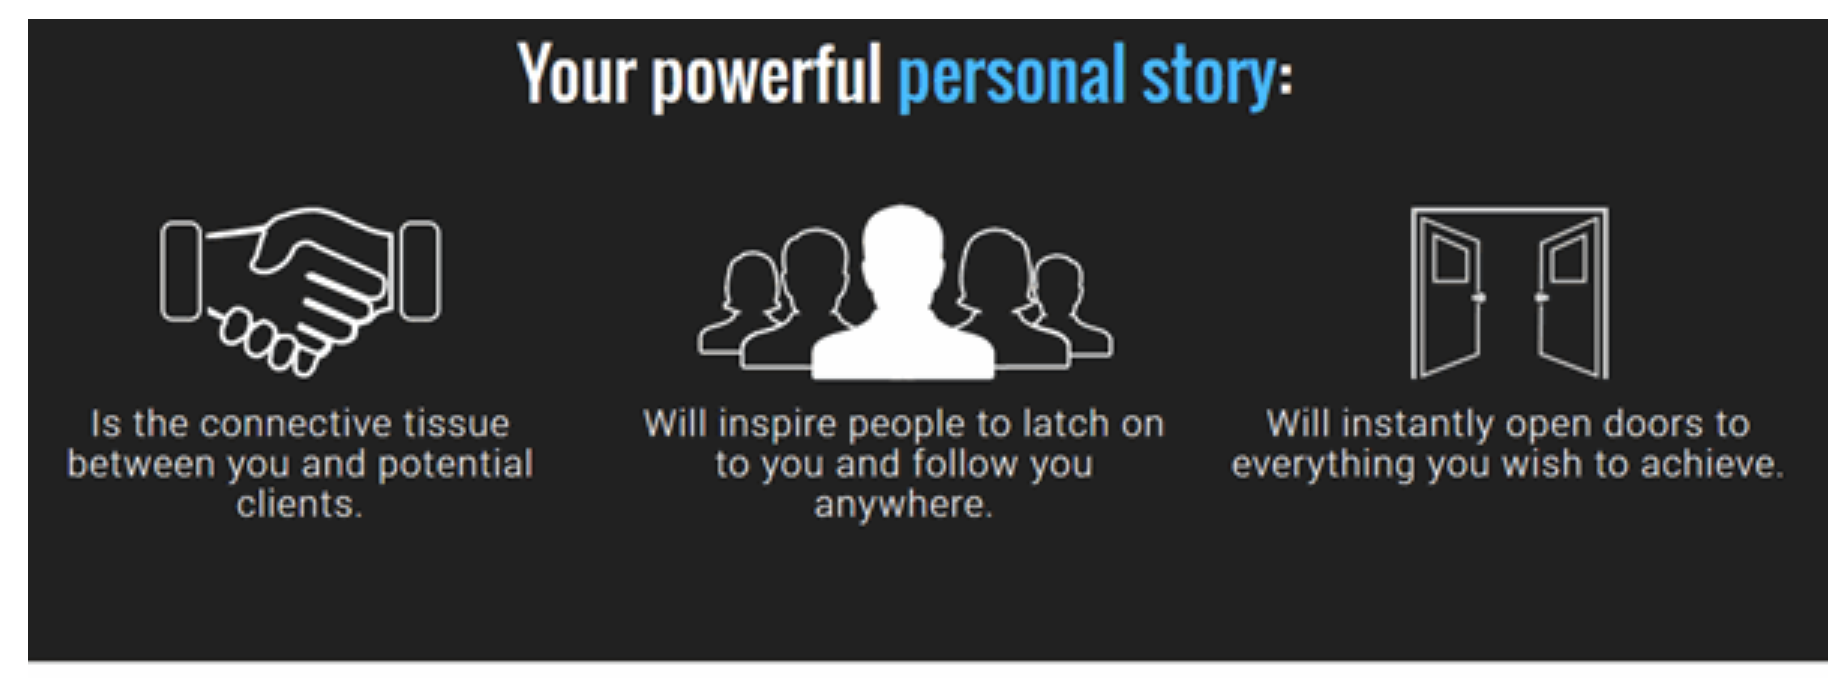 What is Your Powerful Personal Story